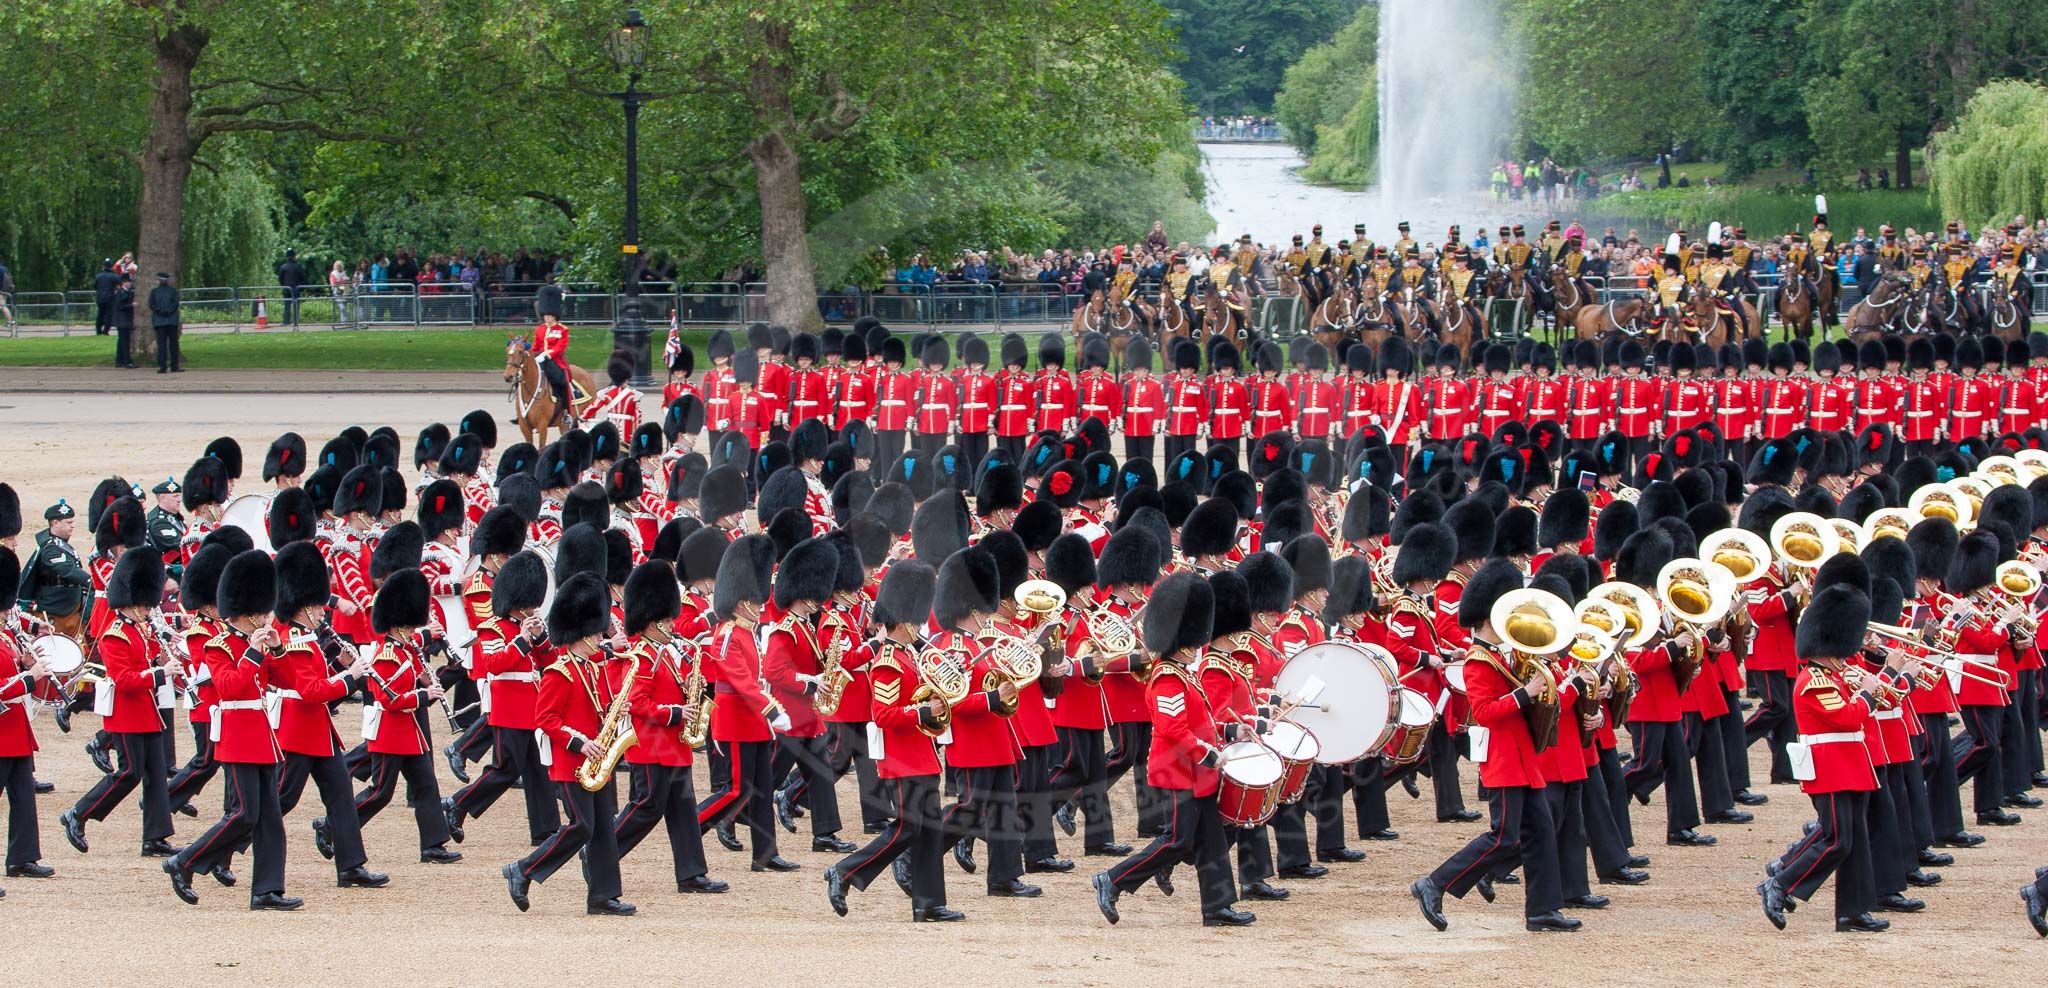 The Colonel's Review 2012: The Massed Bands Troop..
Horse Guards Parade, Westminster,
London SW1,

United Kingdom,
on 09 June 2012 at 11:11, image #239